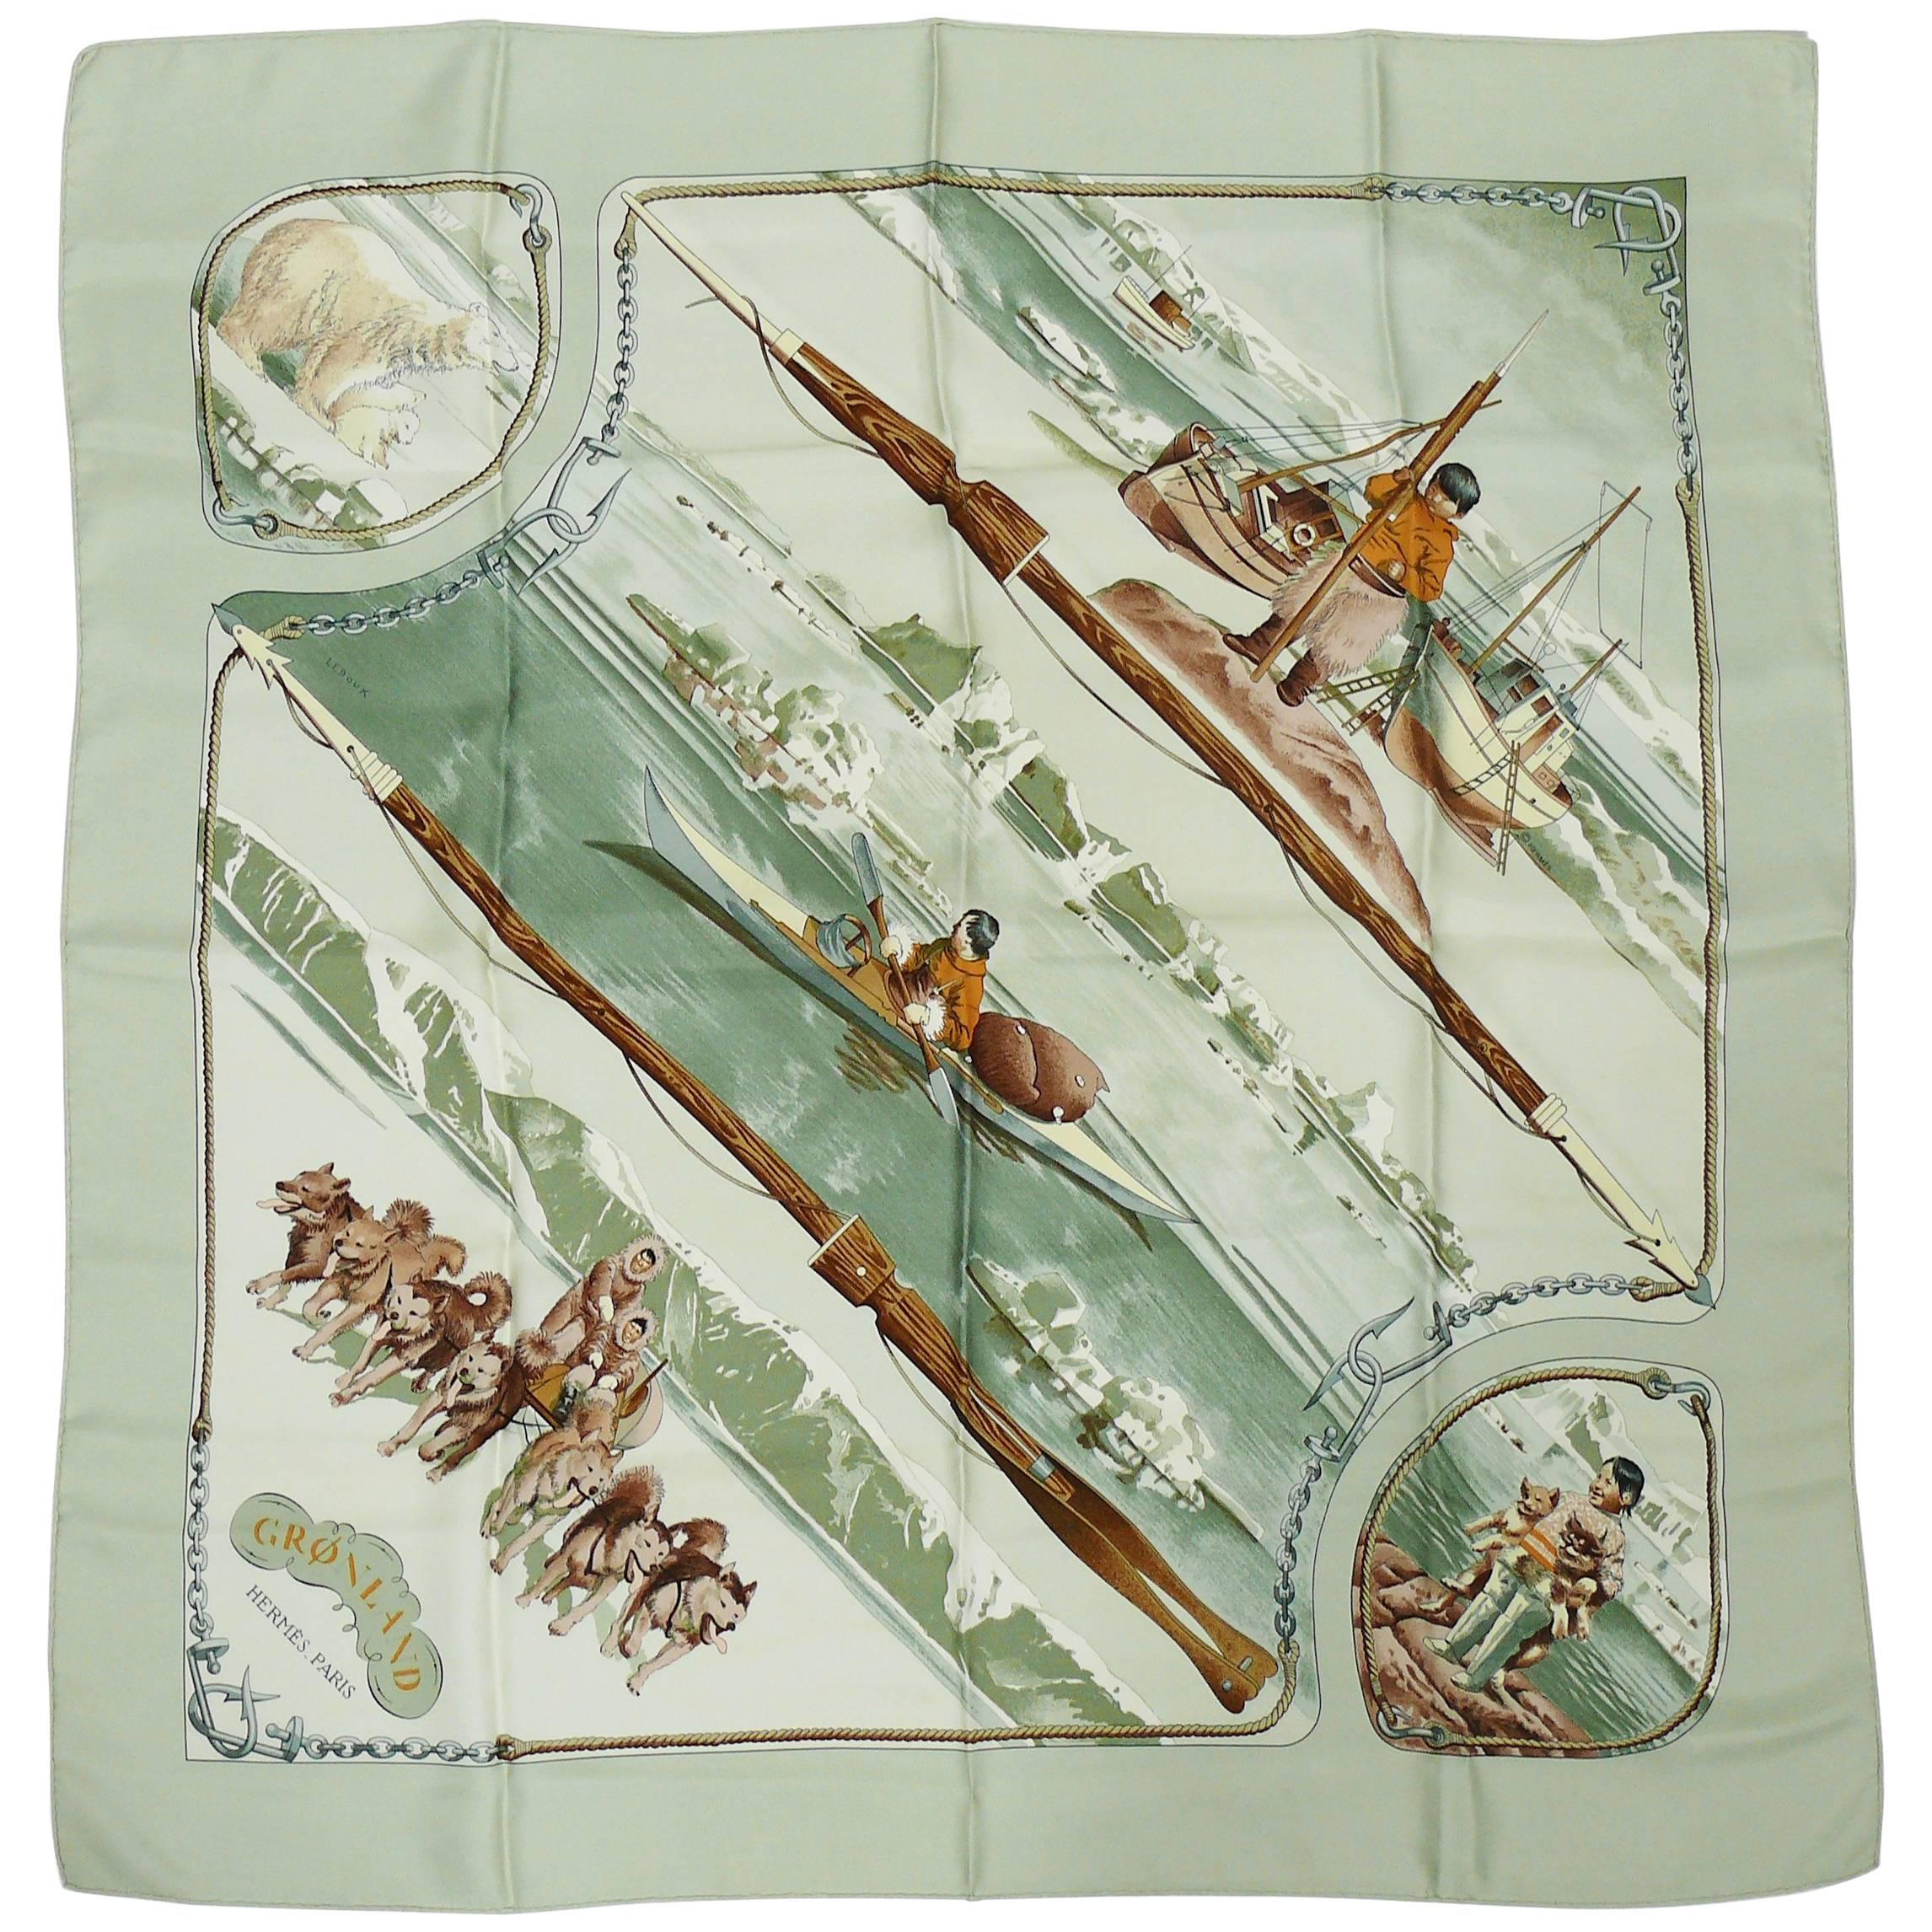 Hermes Vintage Silk Carre Scarf "Gronland" by Philippe Ledoux